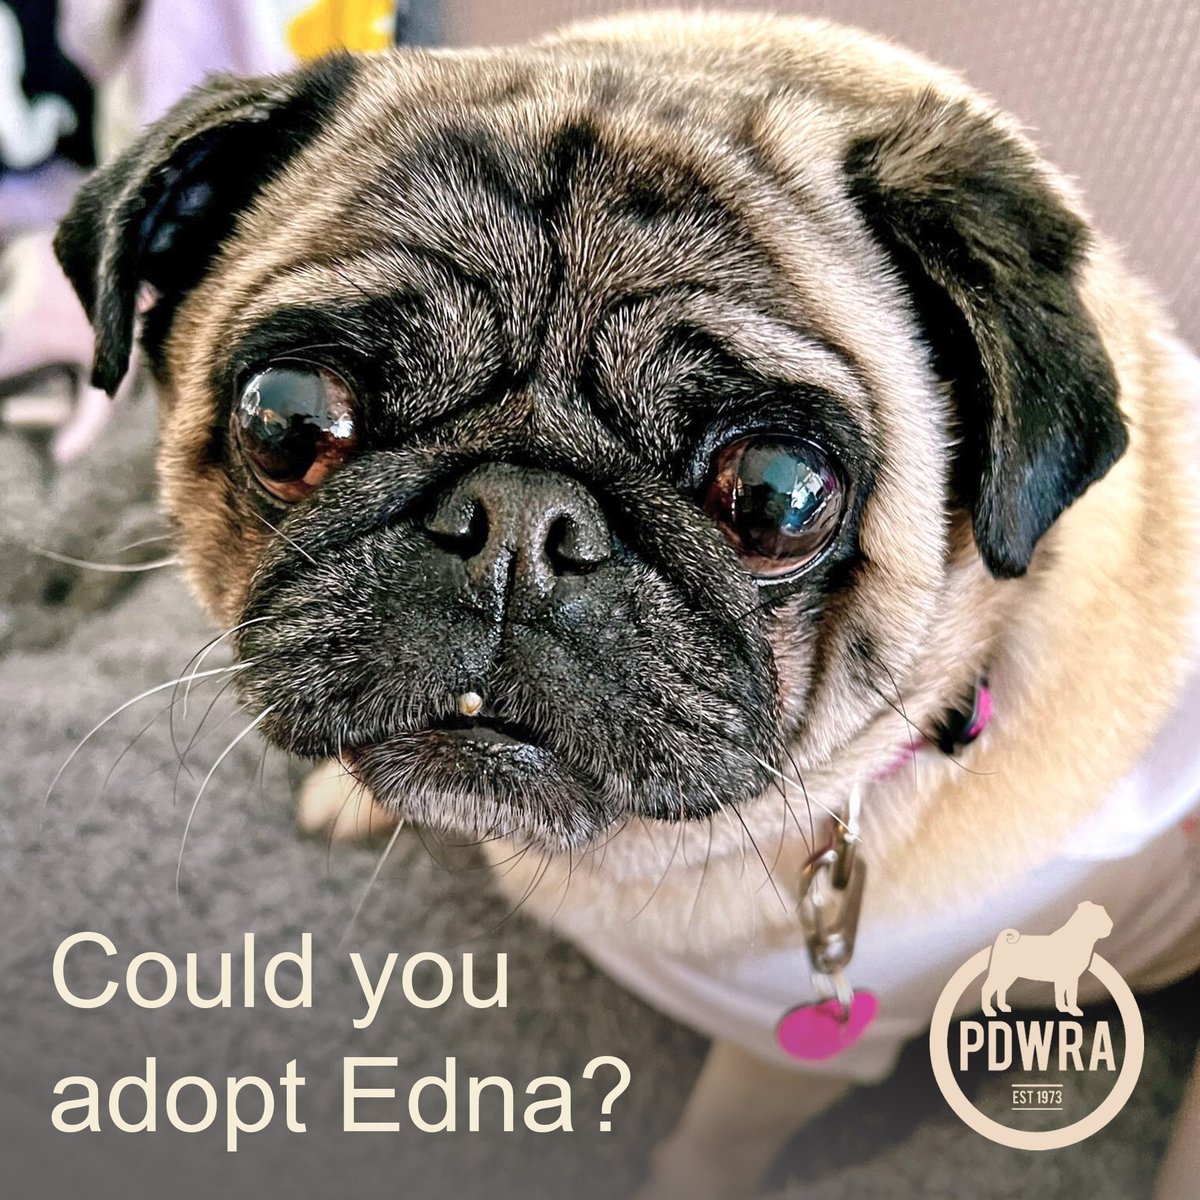 Edna needs to be in a forever home where she's the only dog. If you think you might be able to adopt Edna, please go to our website to find out more about her - ecs.page.link/pDTfS #pdwra #pugcharity #pugwelfare #friendsofwelfare #foreverhome #pugadoption #pug